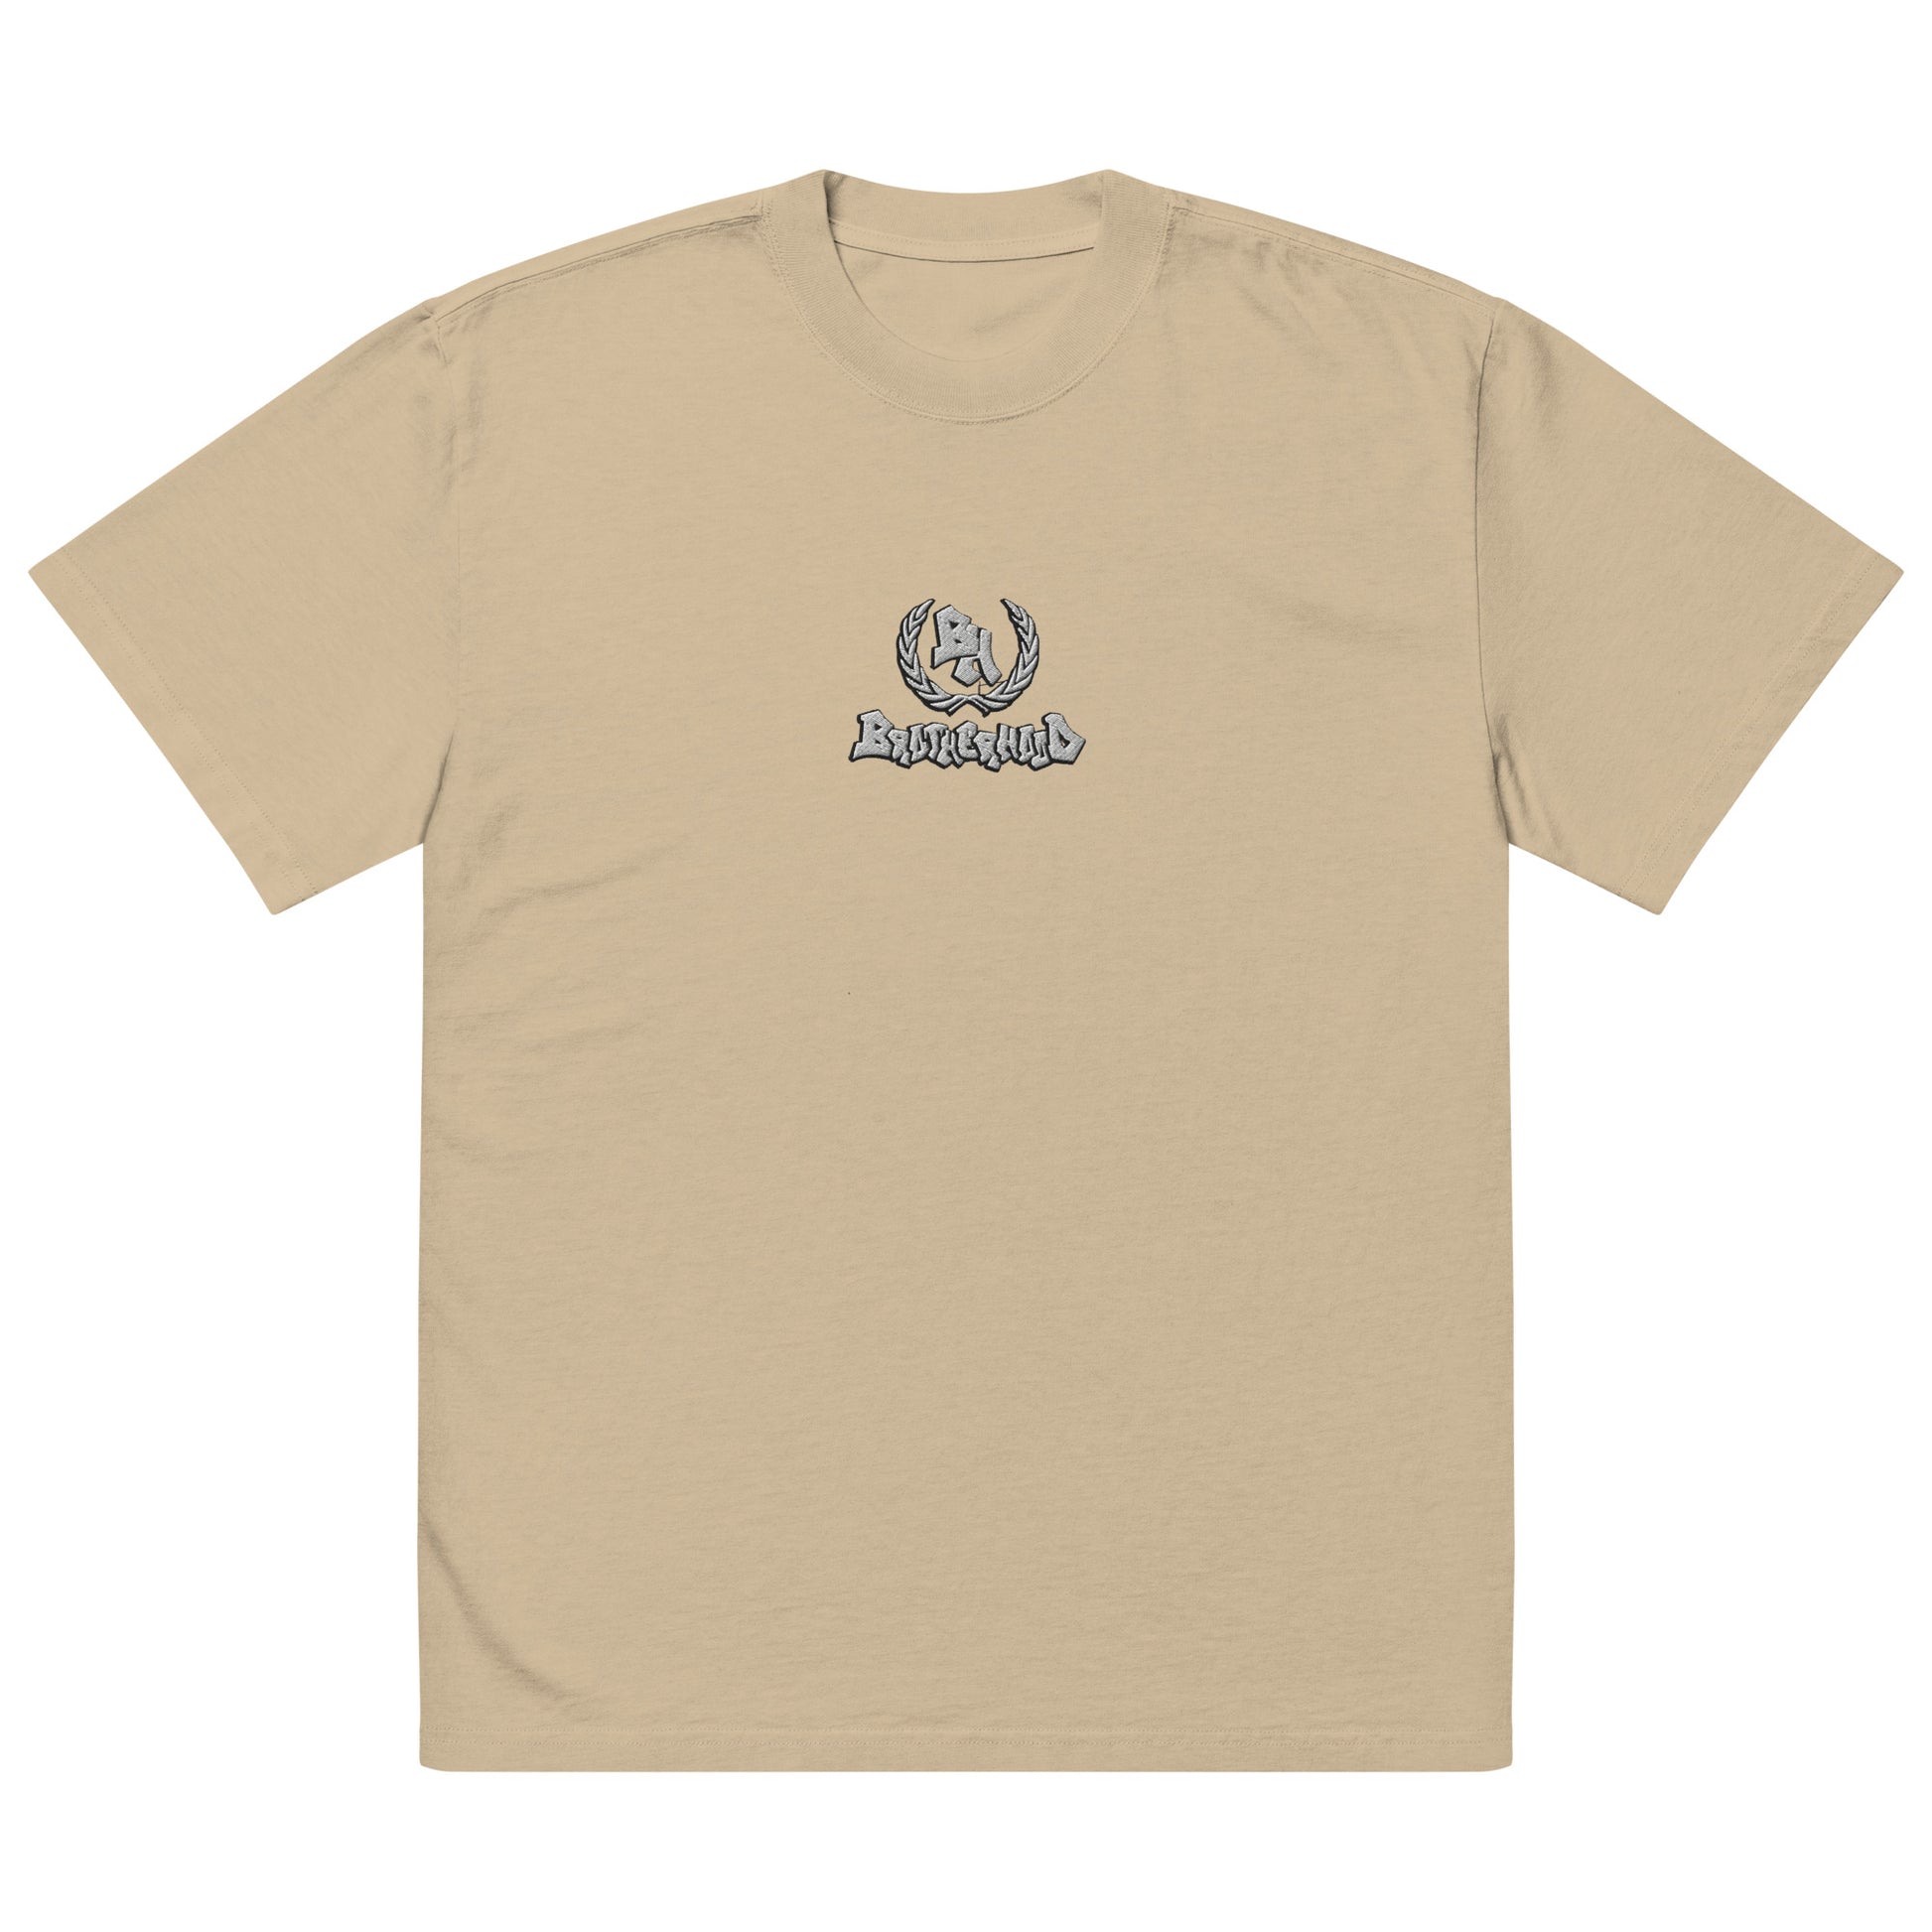 Oversized faded t-shirt faded khaki. A loose-fitting, worn-out t-shirt with the word "Brotherhood" and the Brotherhood Logo printed on it